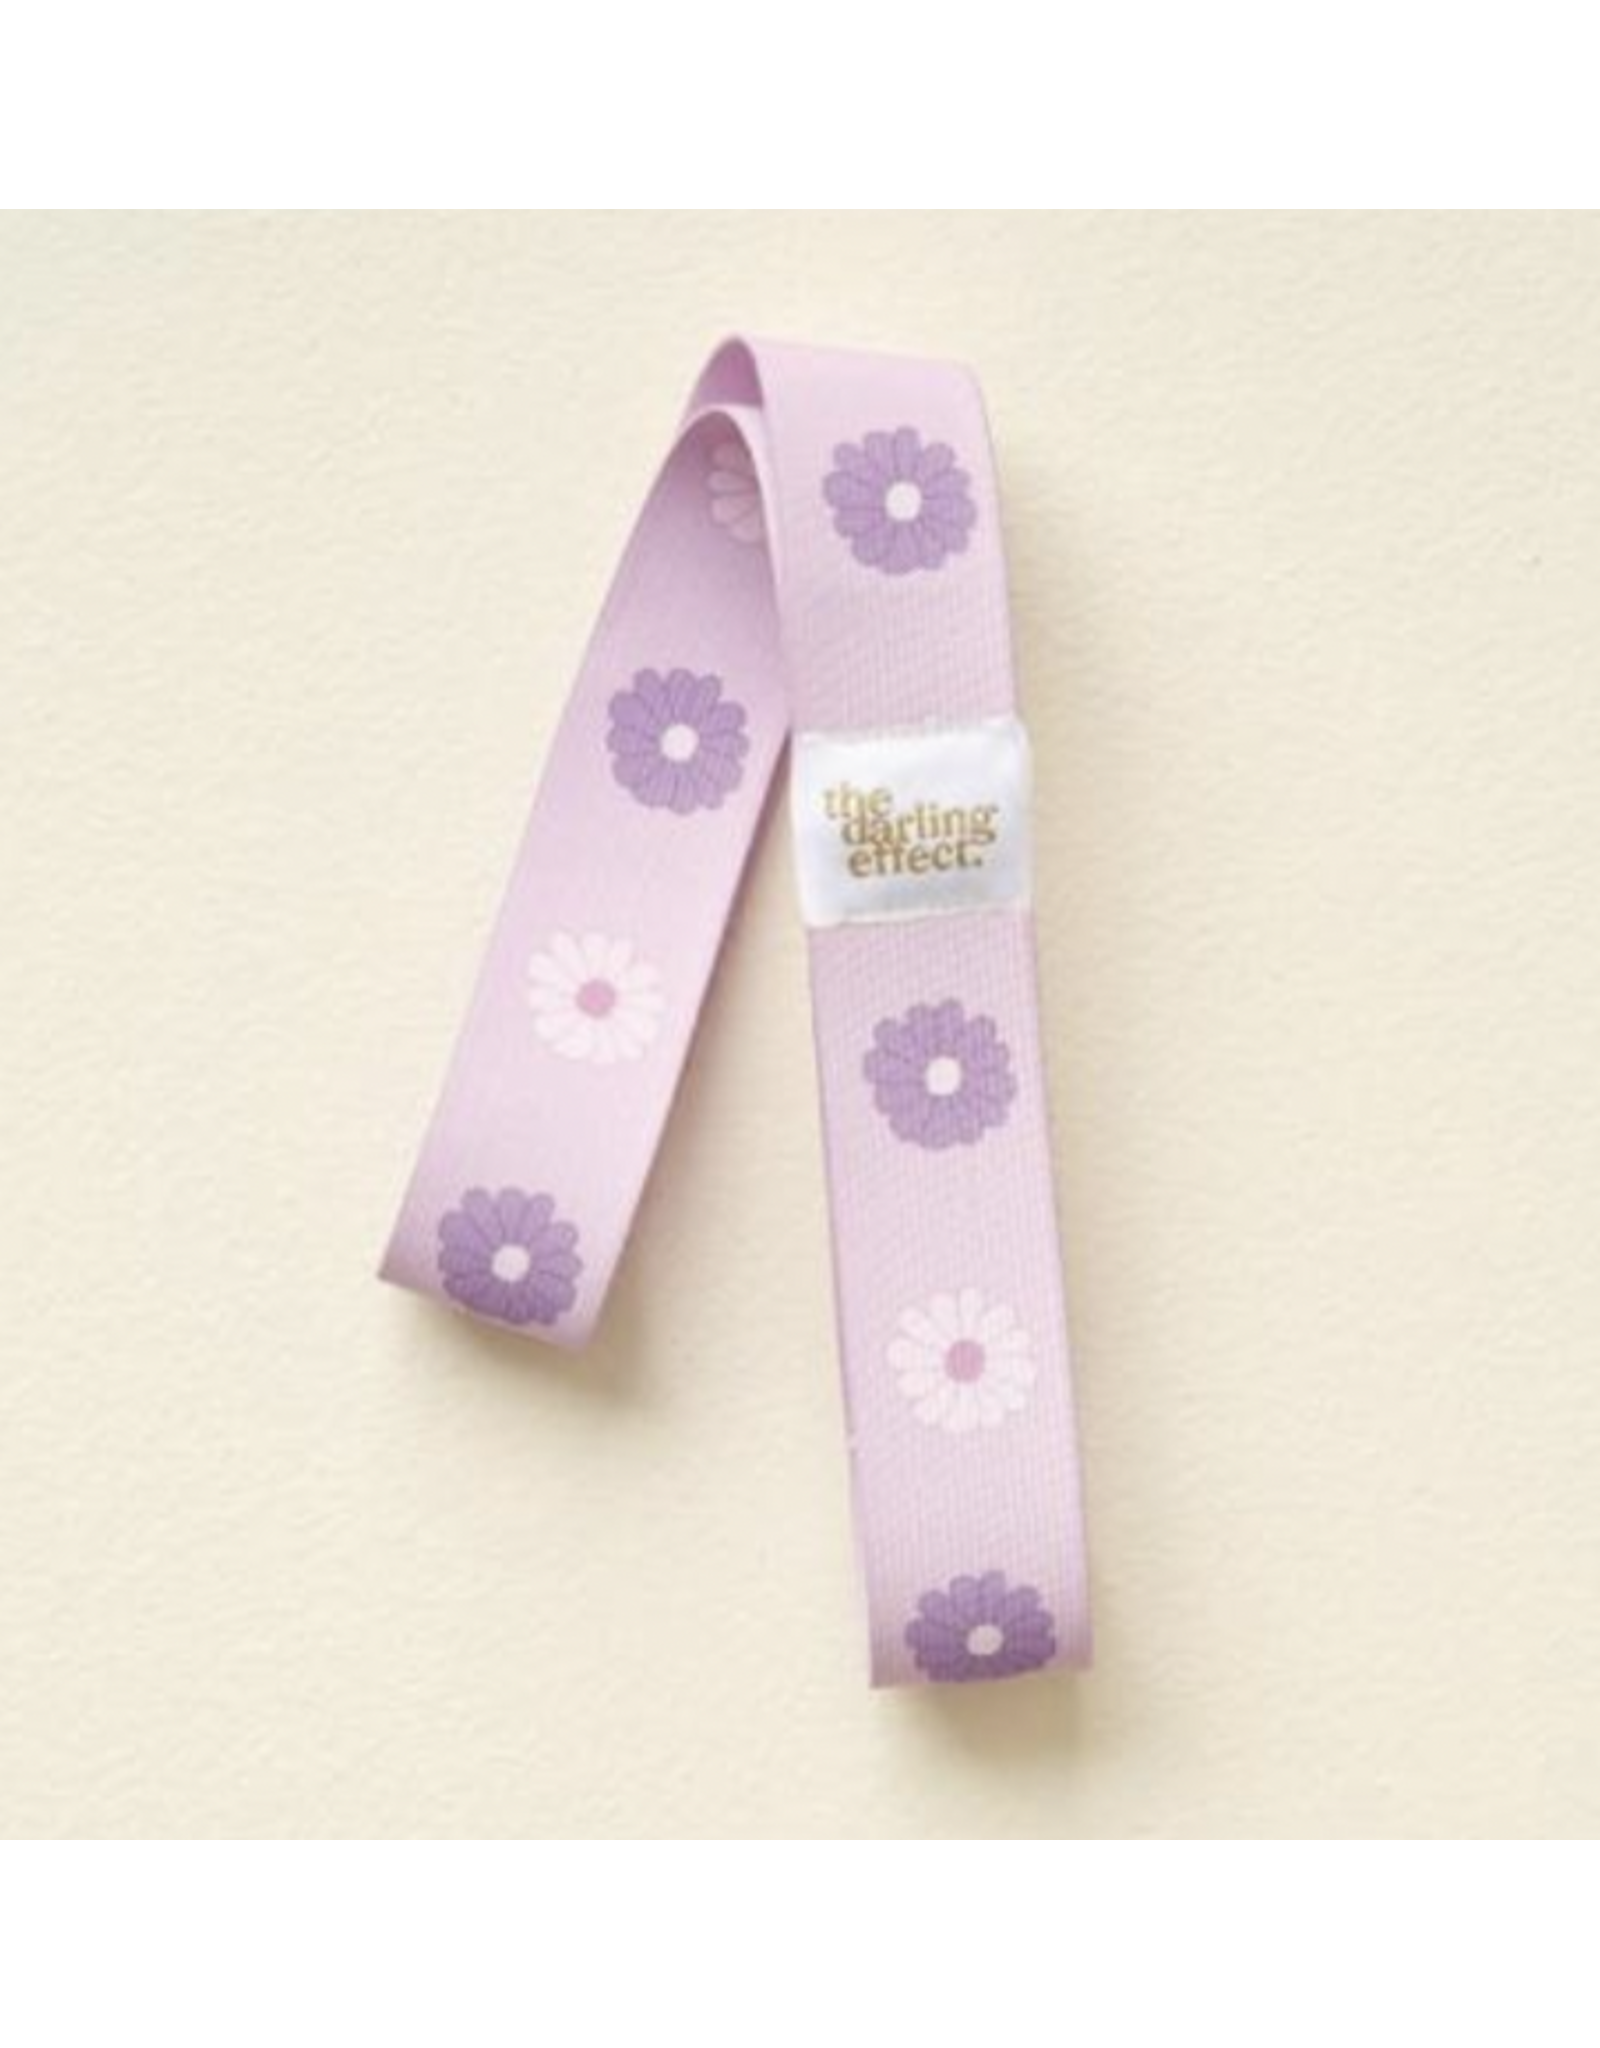 Stay put towel bands-Darling Daisy Purple